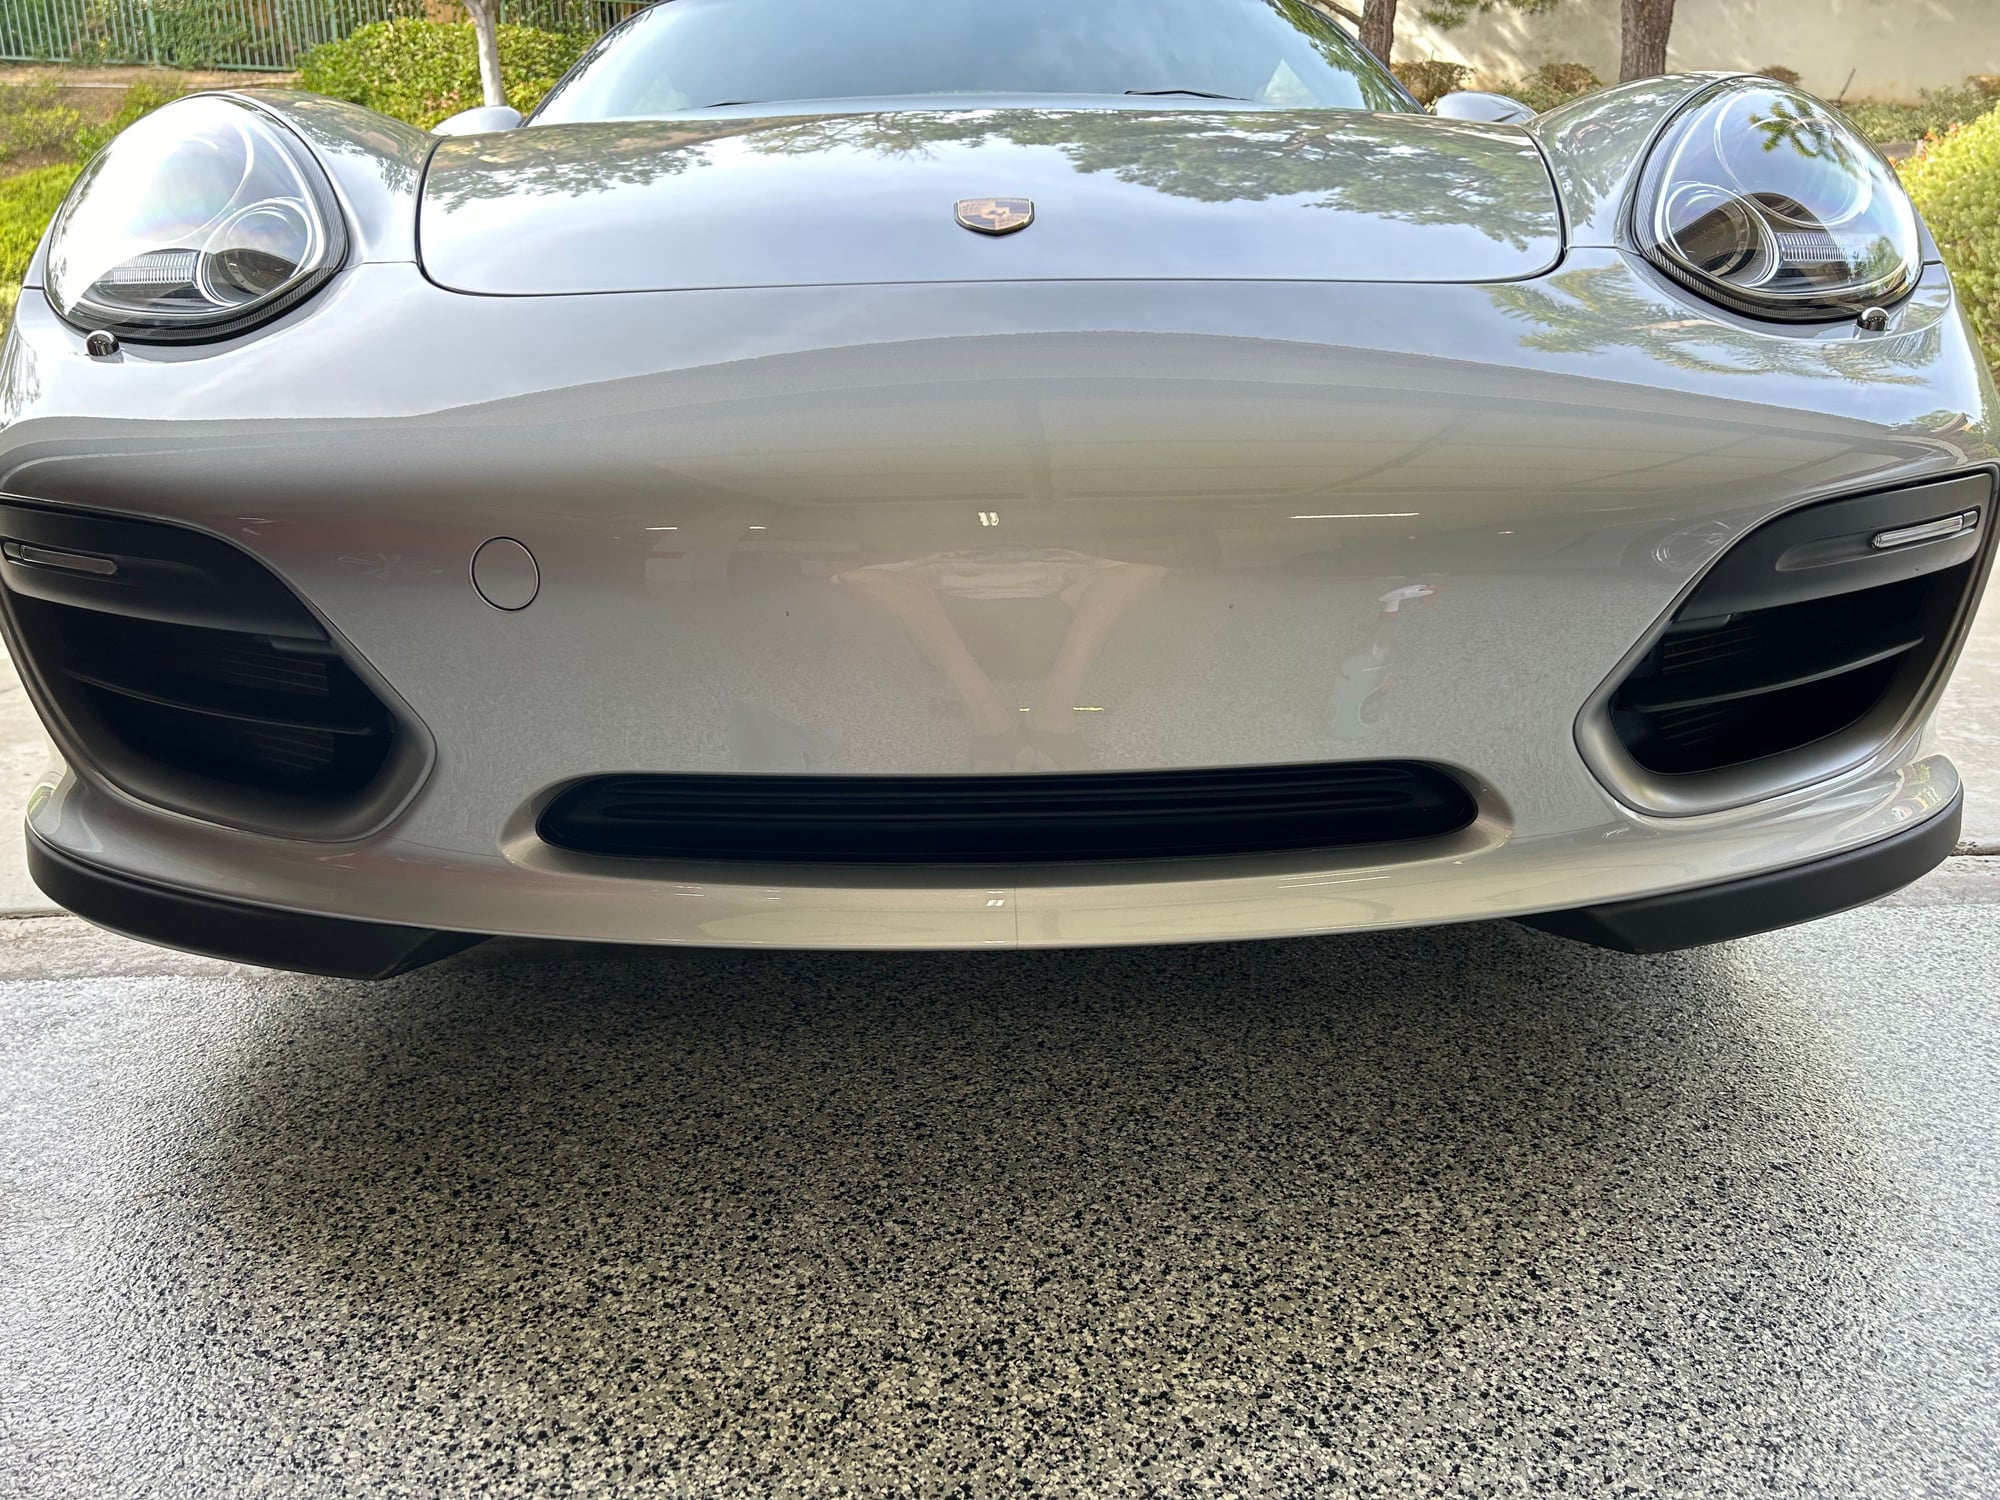 2011 Porsche Boxster - 2011 Boxster Spyder creampuff, only 13k miles! - Used - VIN WP0CB2A82BS745251 - 13,200 Miles - 6 cyl - 2WD - Manual - Convertible - Silver - Orange County, CA 92679, United States